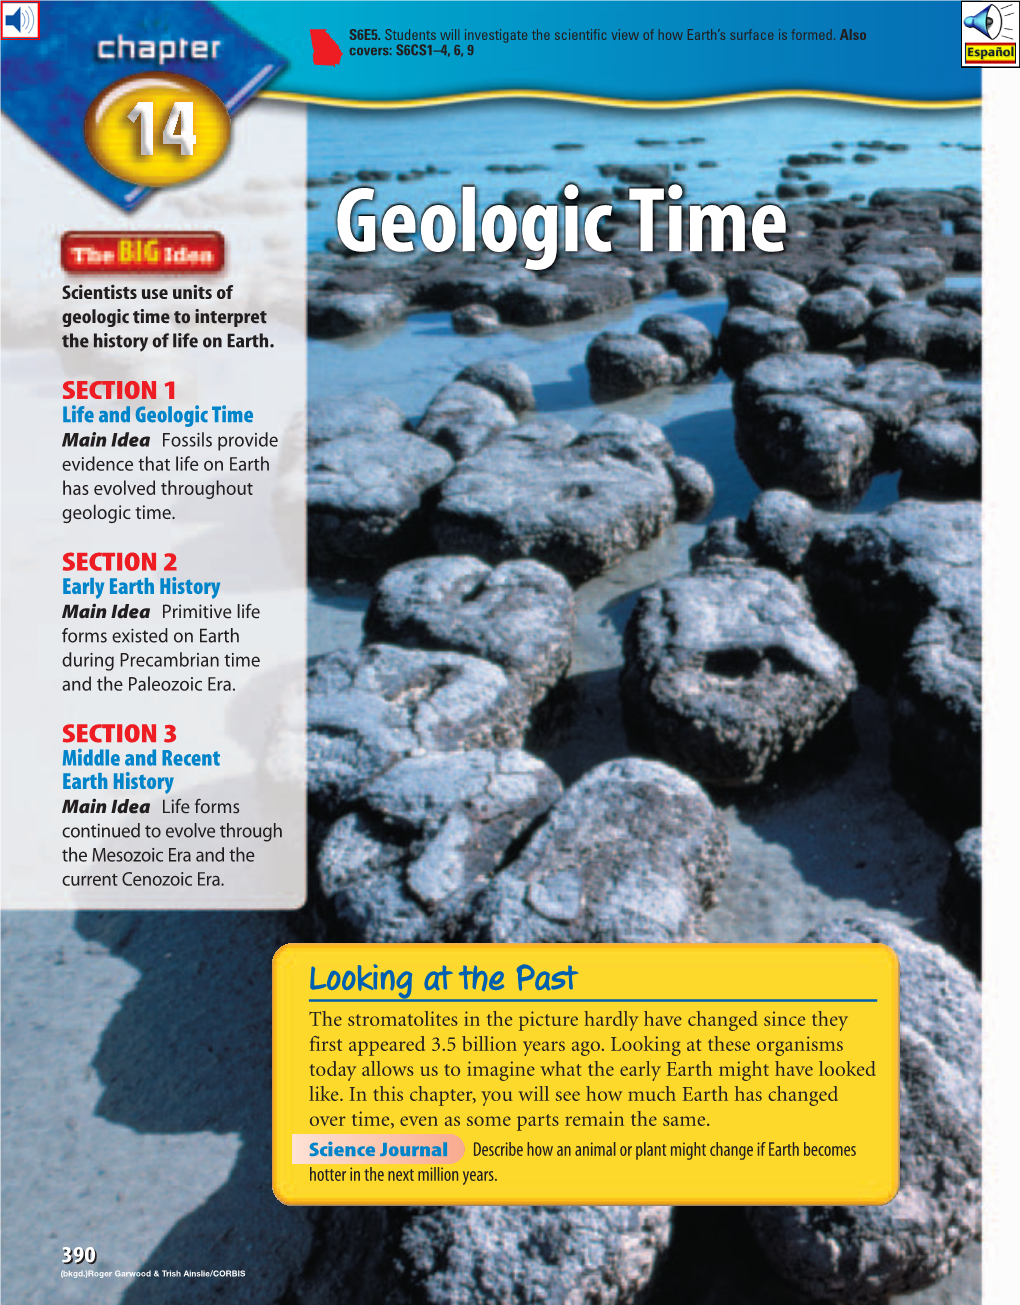 Geologic Time Scientists Use Units of Geologic Time to Interpret the History of Life on Earth